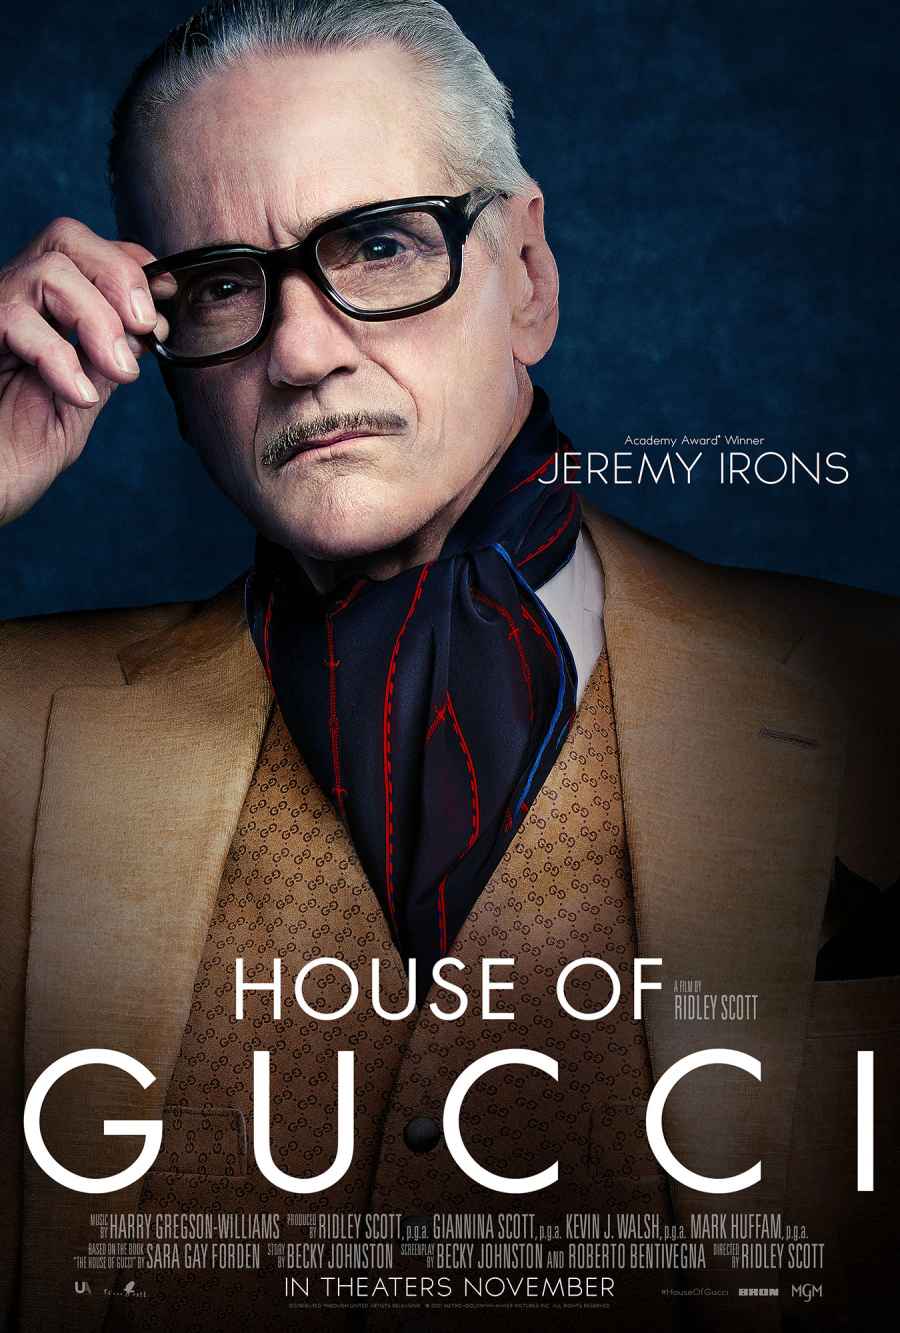 House of Gucci Character Poster Jeremy Irons